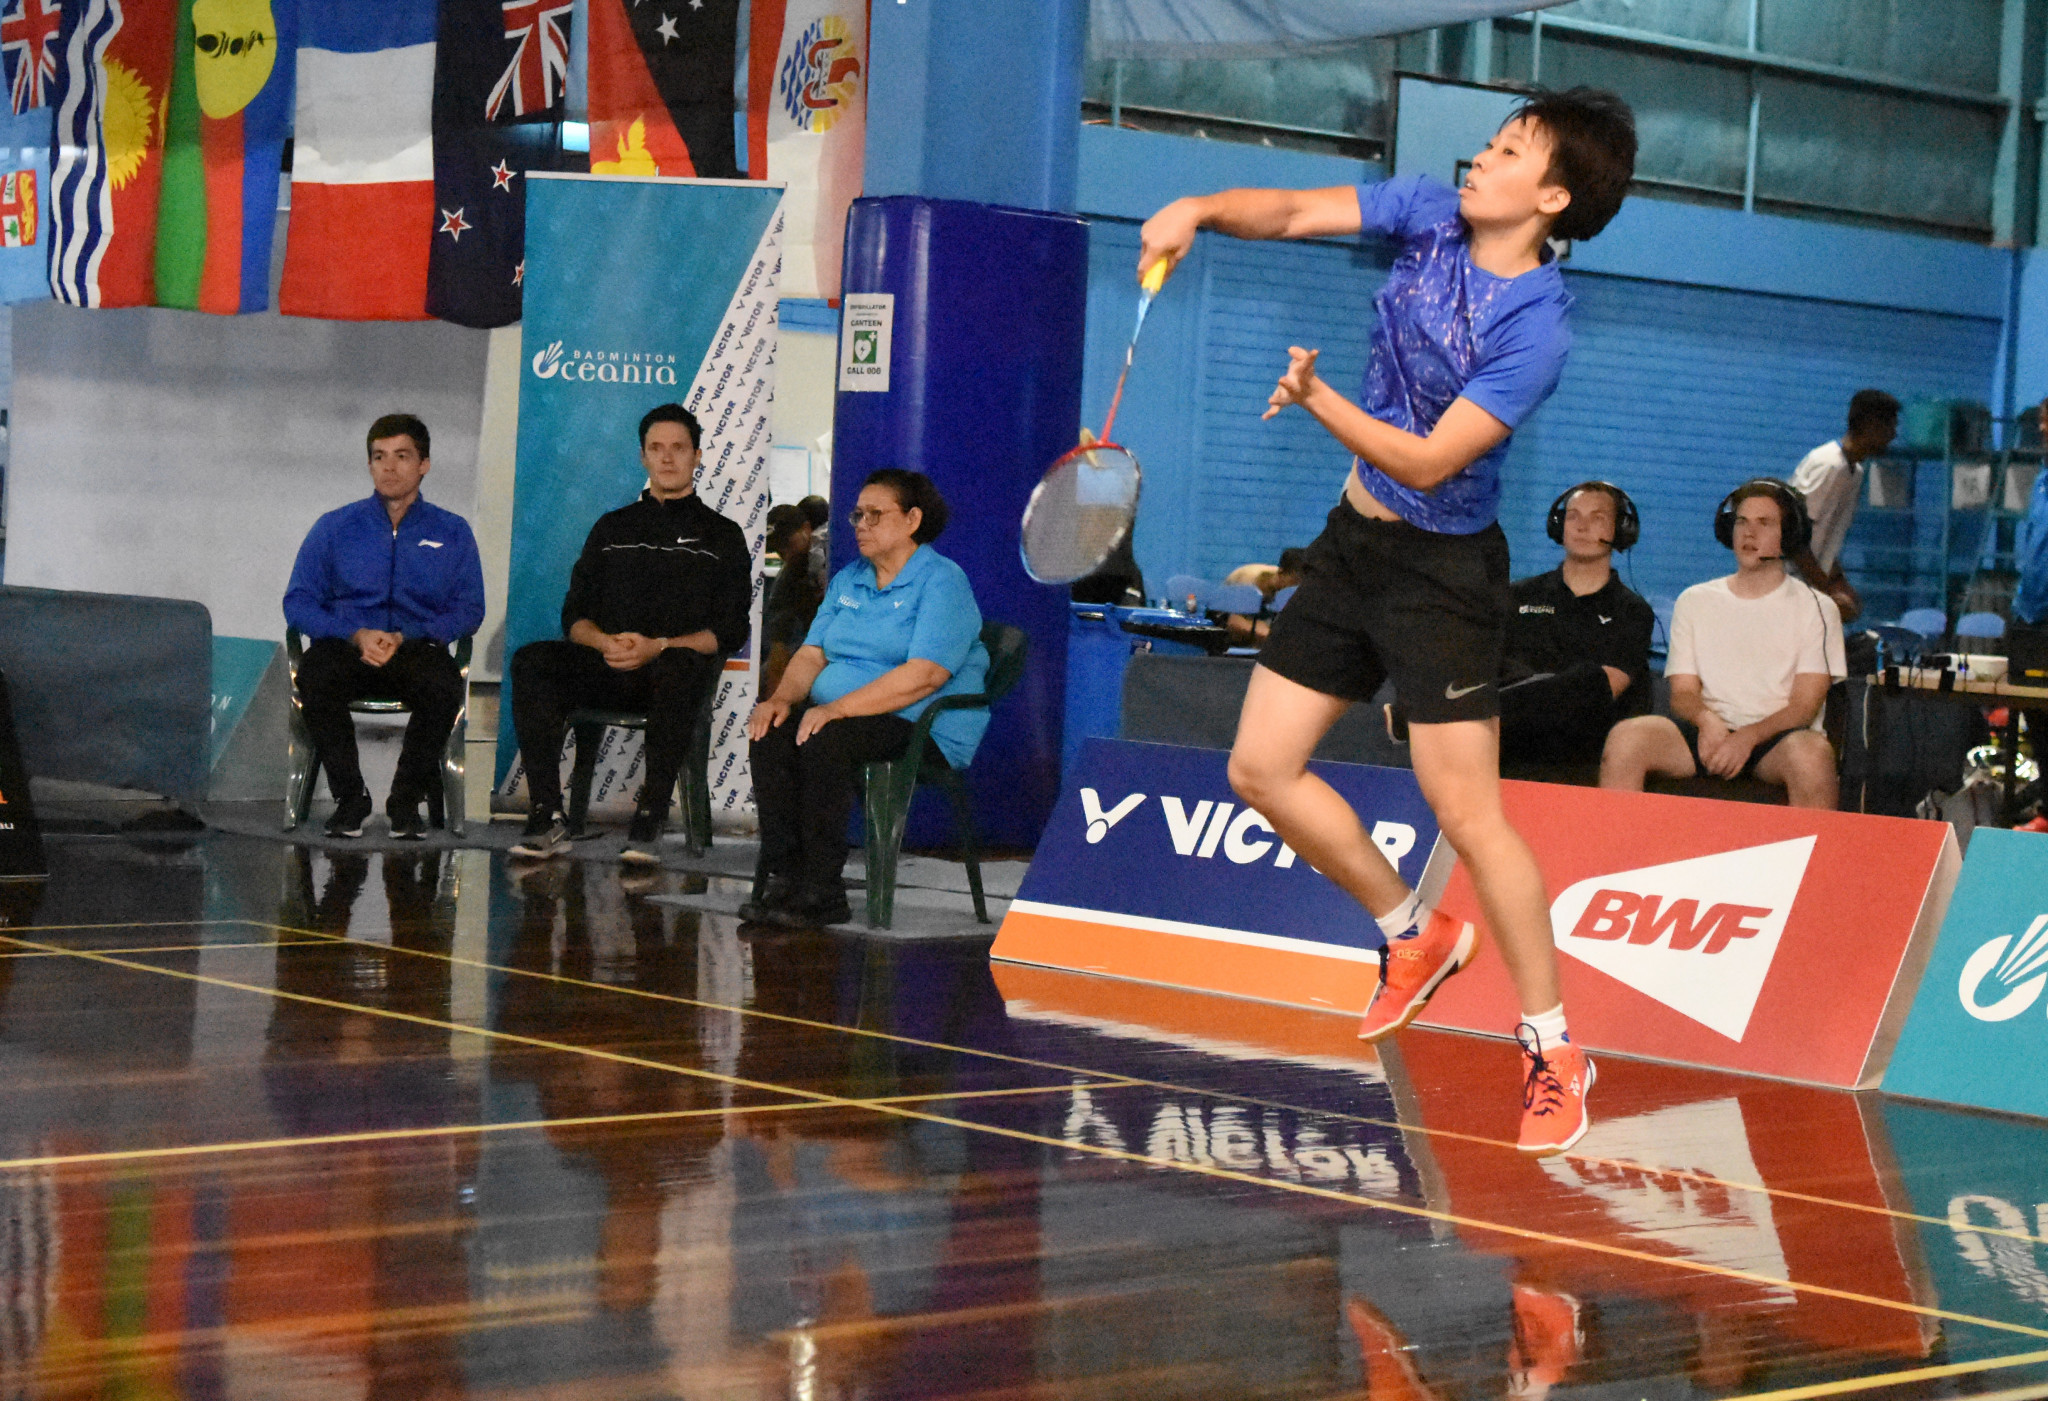 Wendy Chen Hsuan-yu won the women's singles title at the Oceania Badminton Championships for the sixth year in a row ©Ballarat Badminton